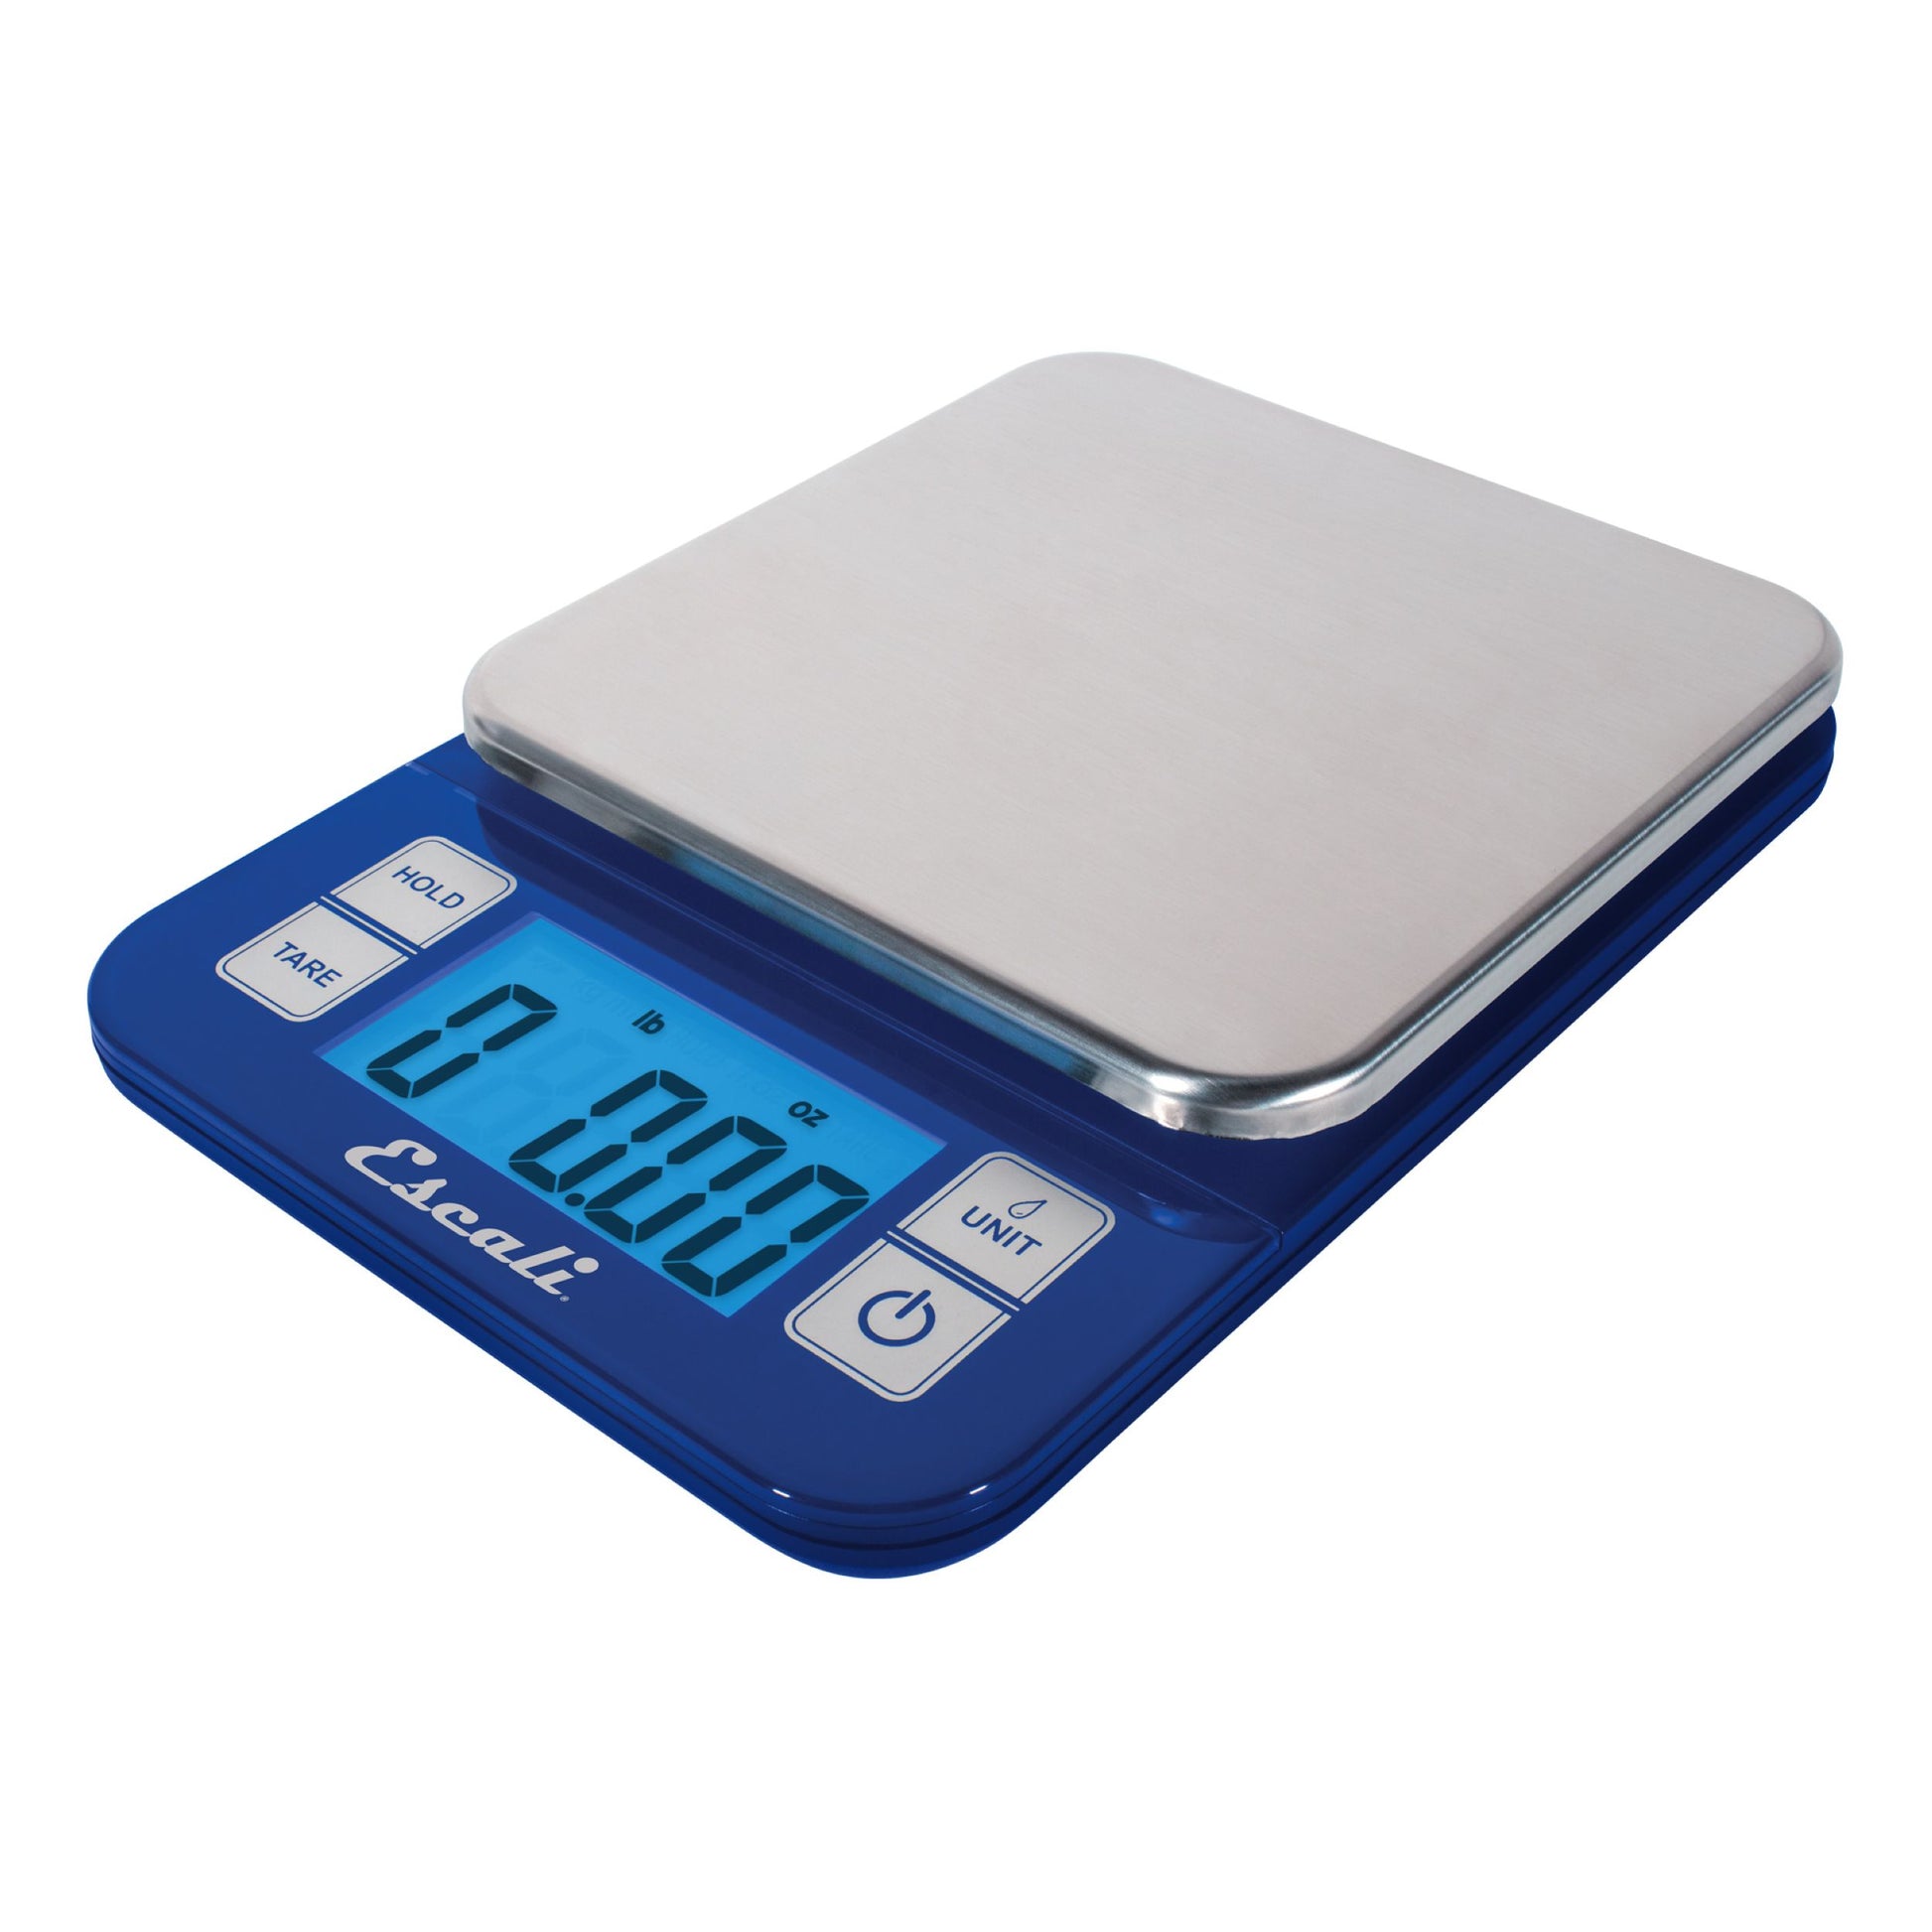 PLUSBRAVO Digital Food Scale in Grams and Ounces Kitchen Scale for